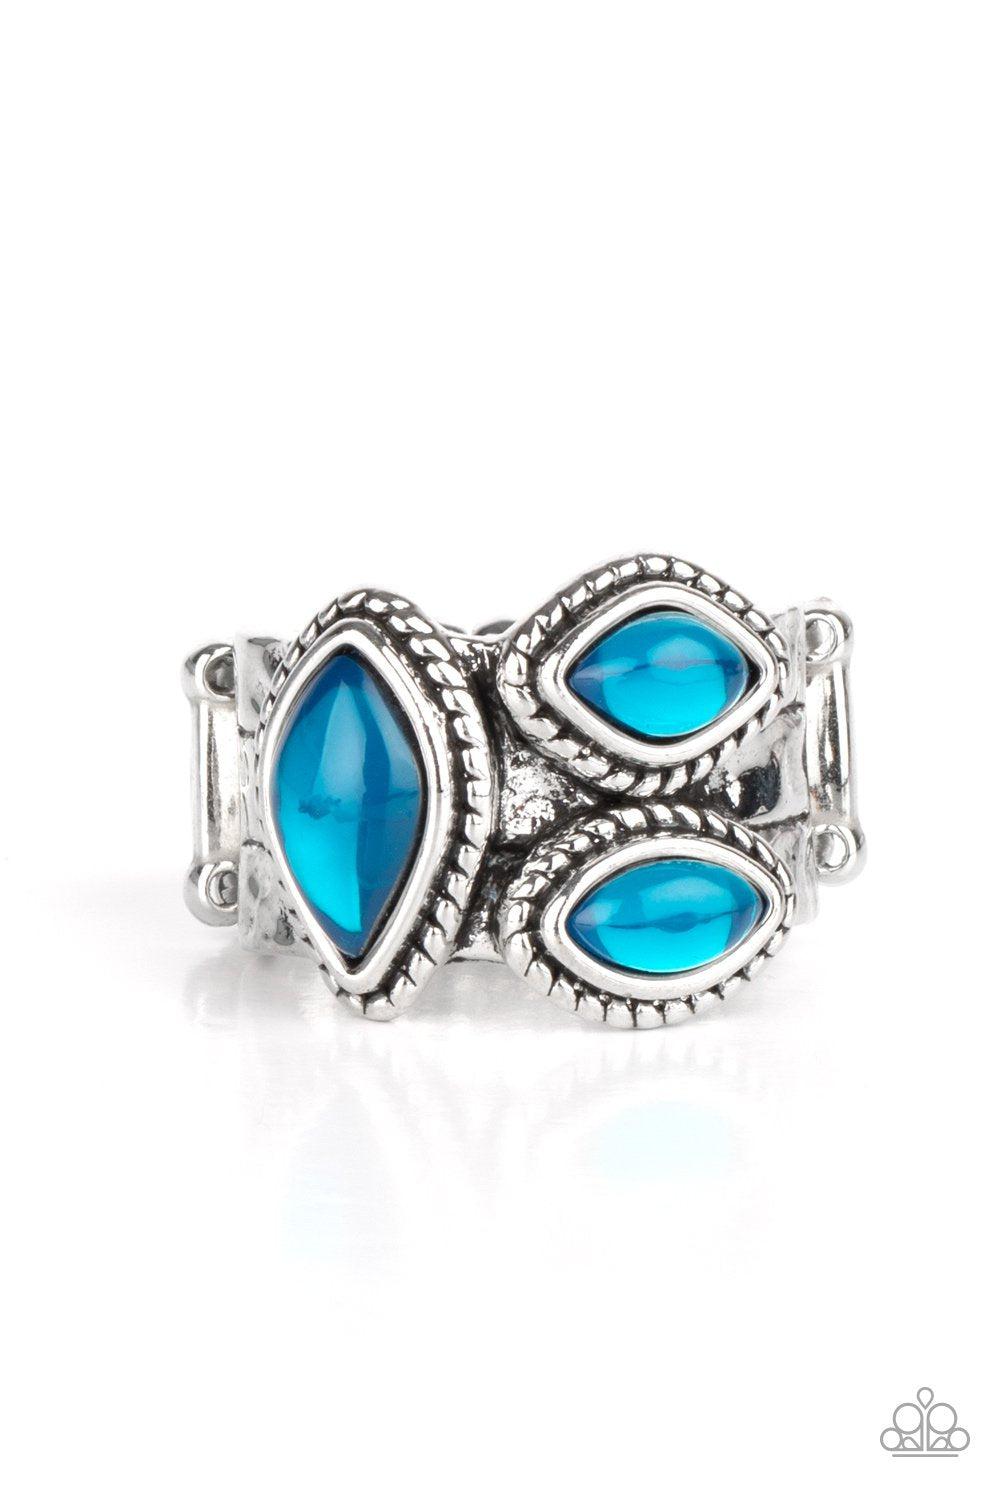 The Charisma Collector Blue Ring - Paparazzi Accessories- lightbox - CarasShop.com - $5 Jewelry by Cara Jewels